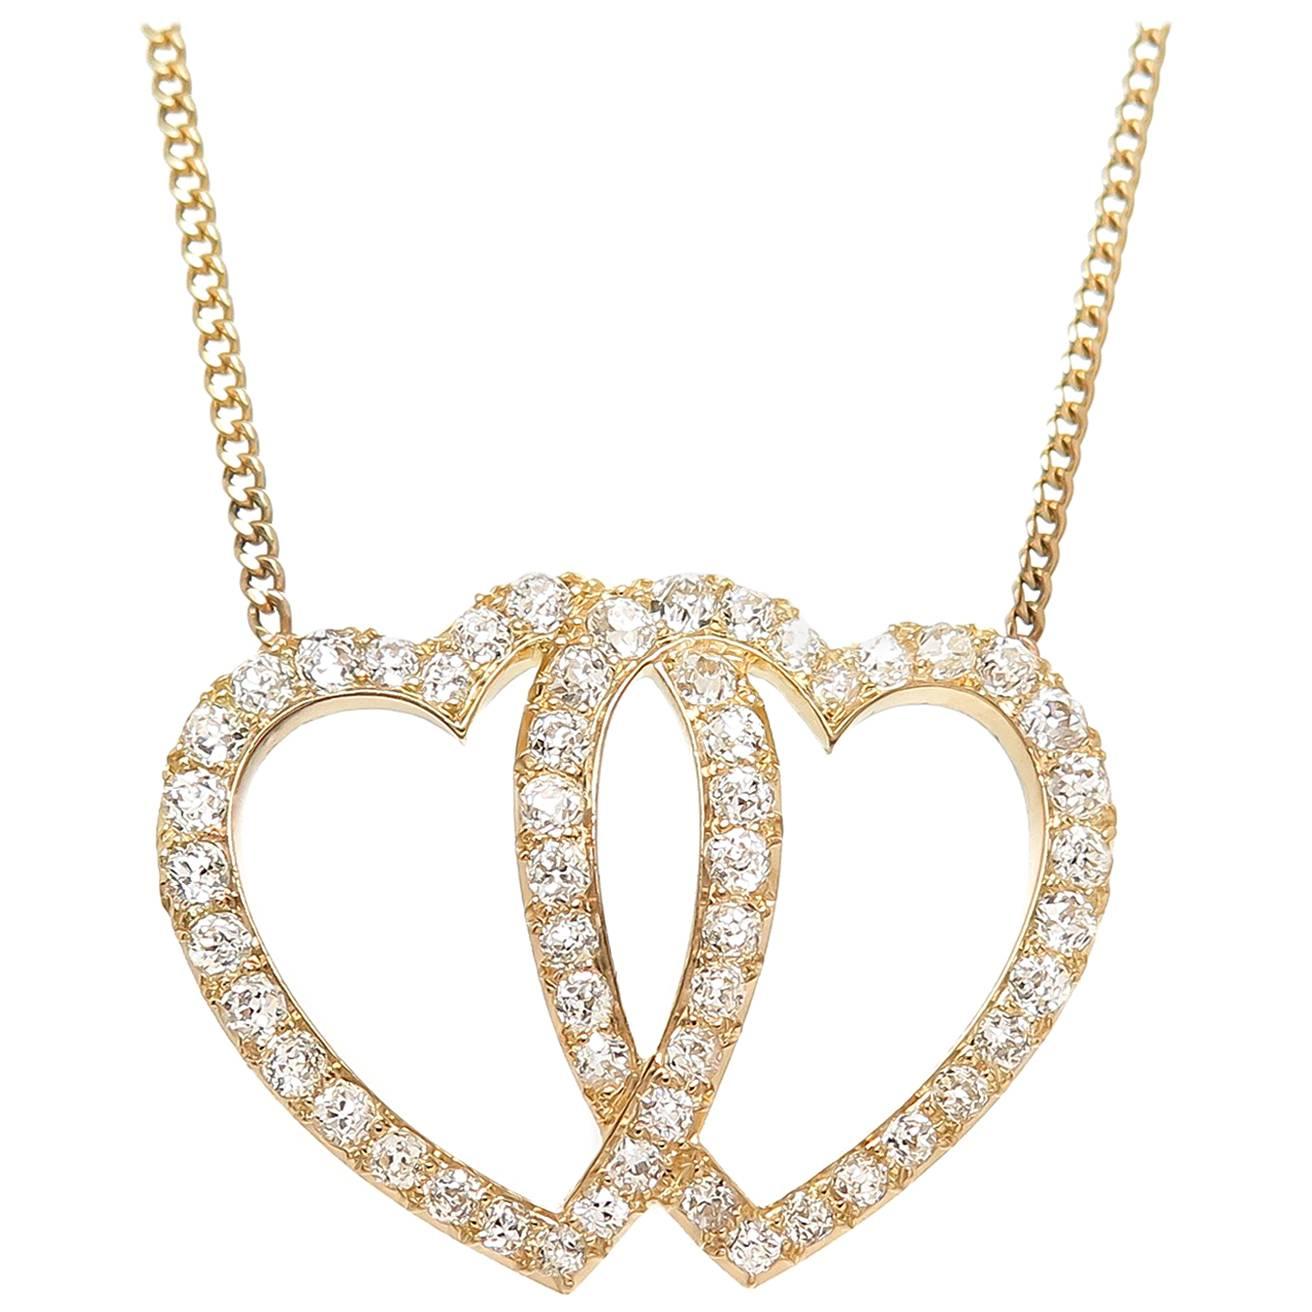 Victorian Gold and Diamond Double Heart Pendant Necklace